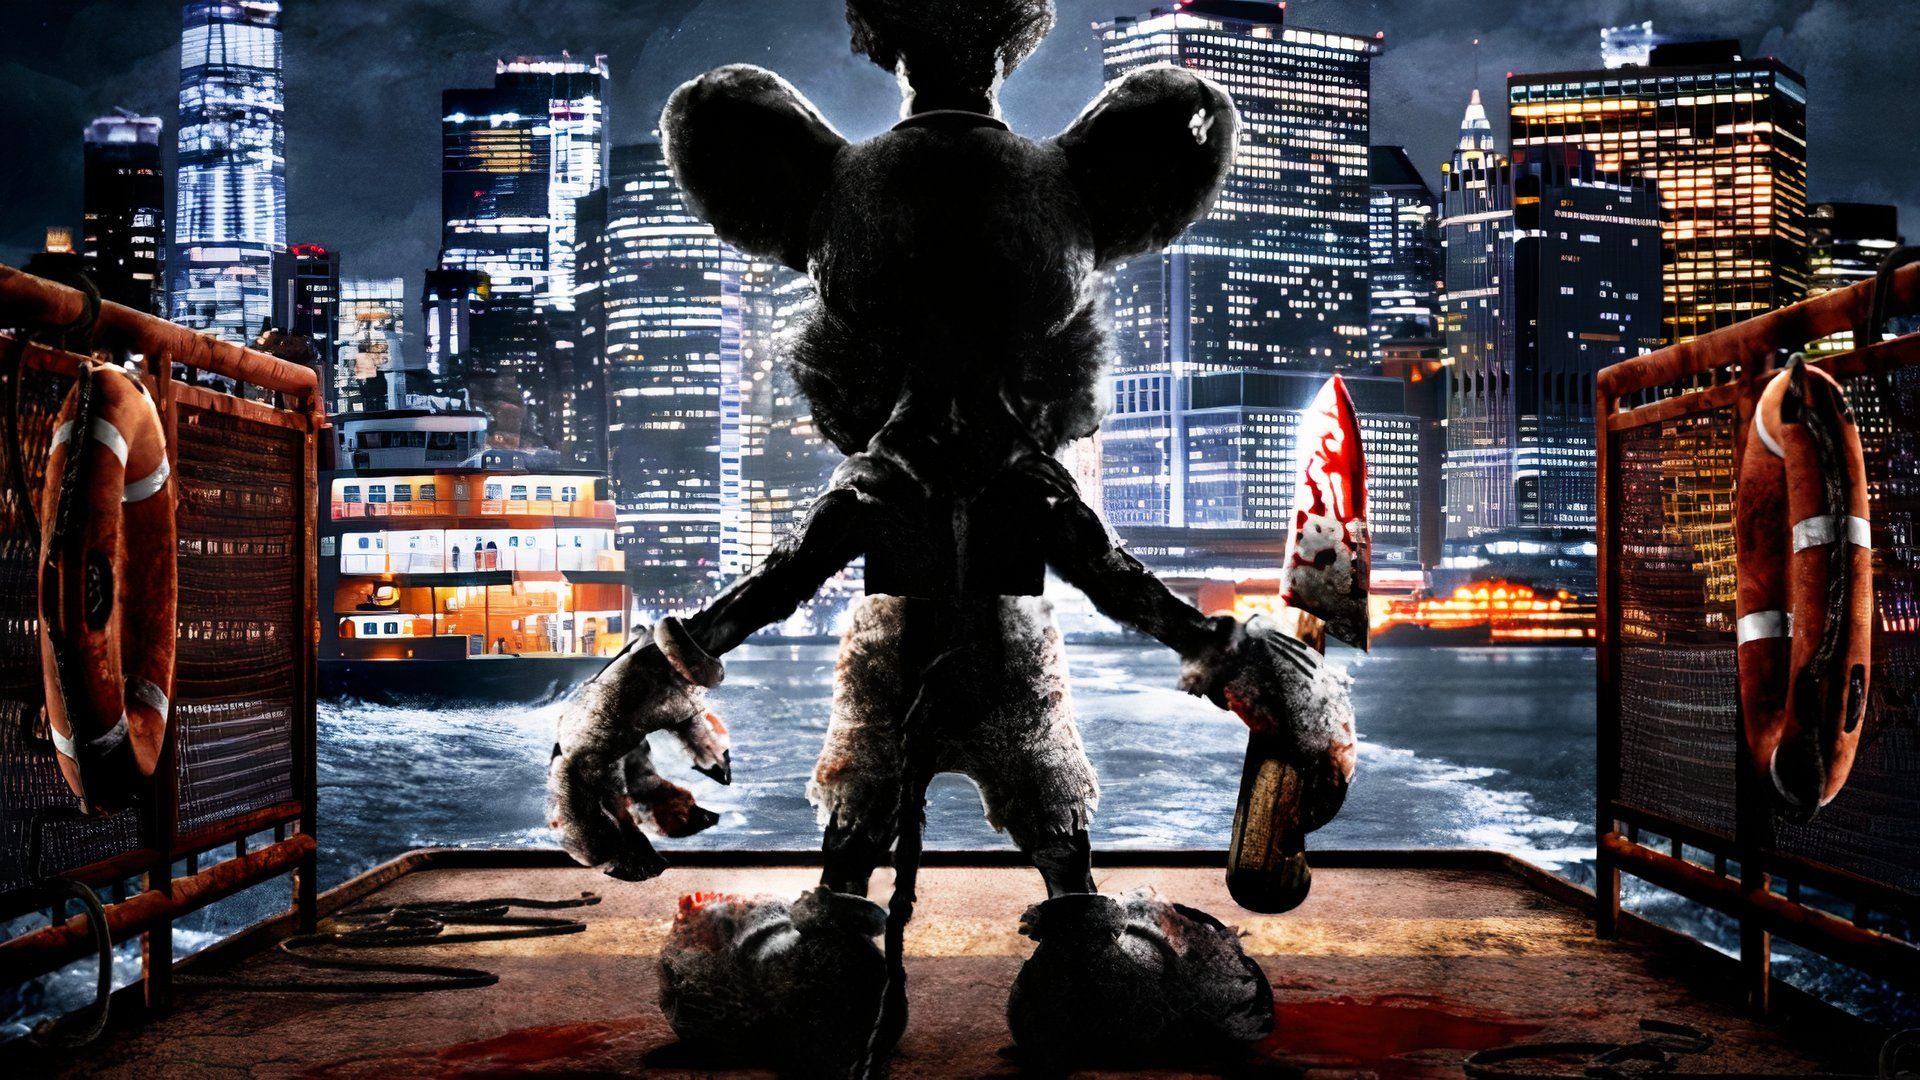 Closeup of Steamboat Willie from the Screamboat poster.